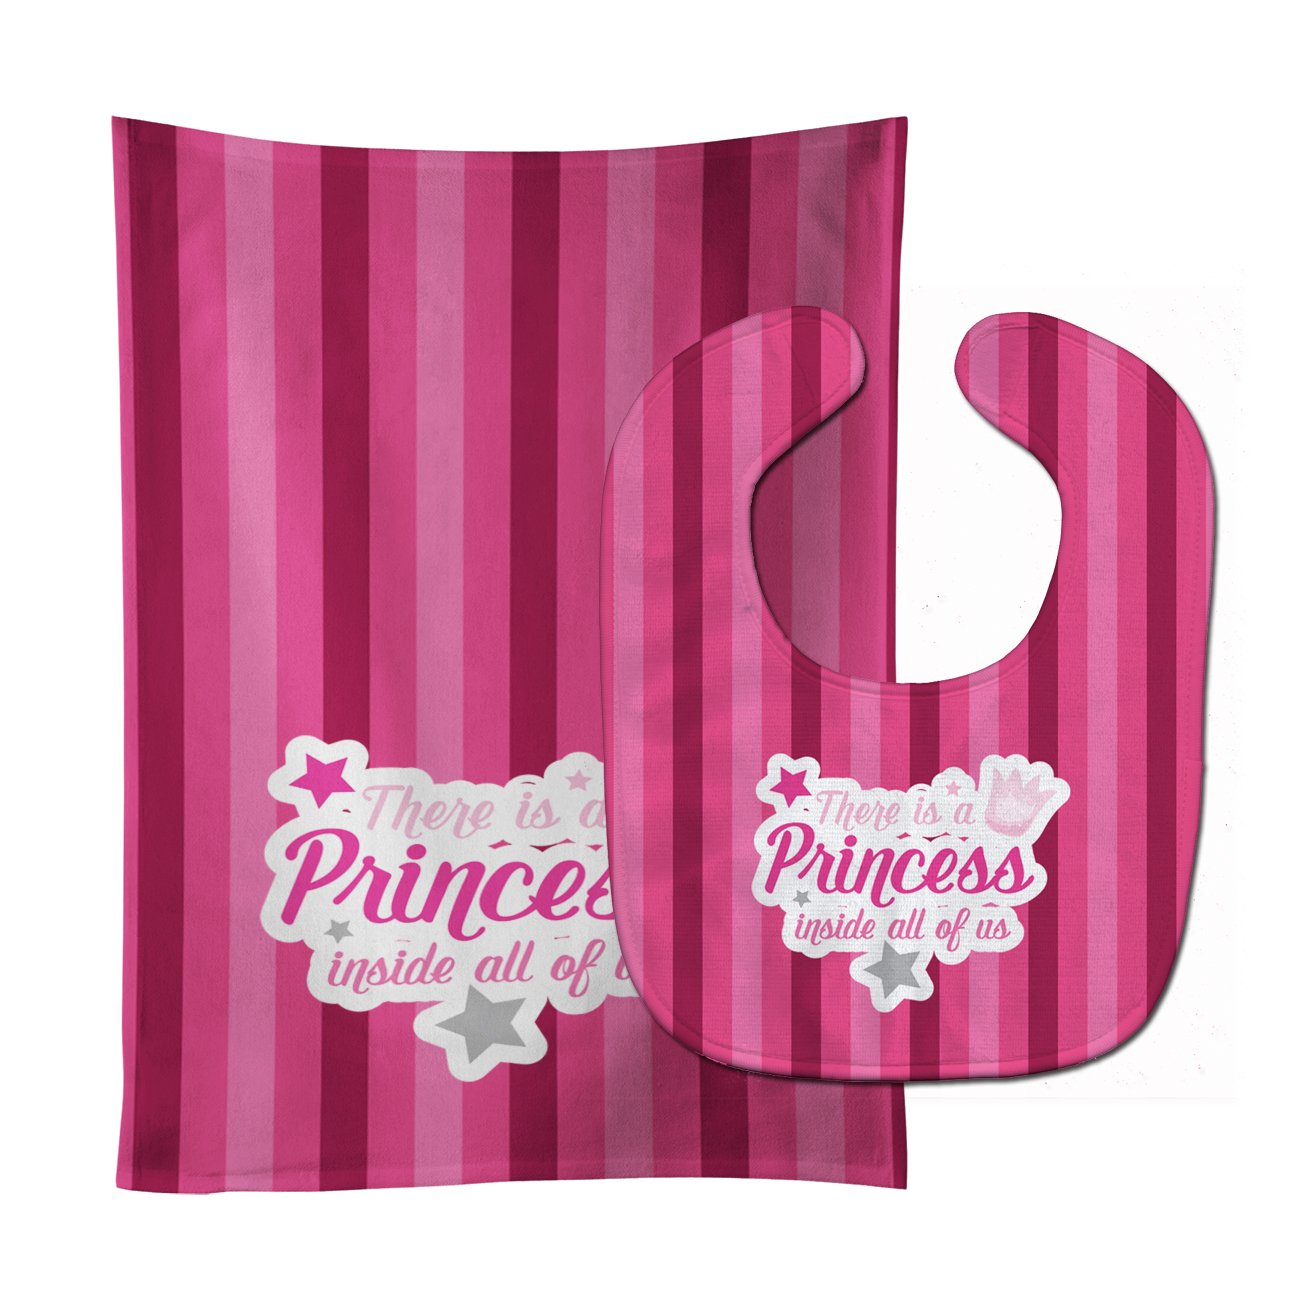 There is a Princess iside all of us Baby Bib & Burp Cloth BB9006STBU by Caroline's Treasures